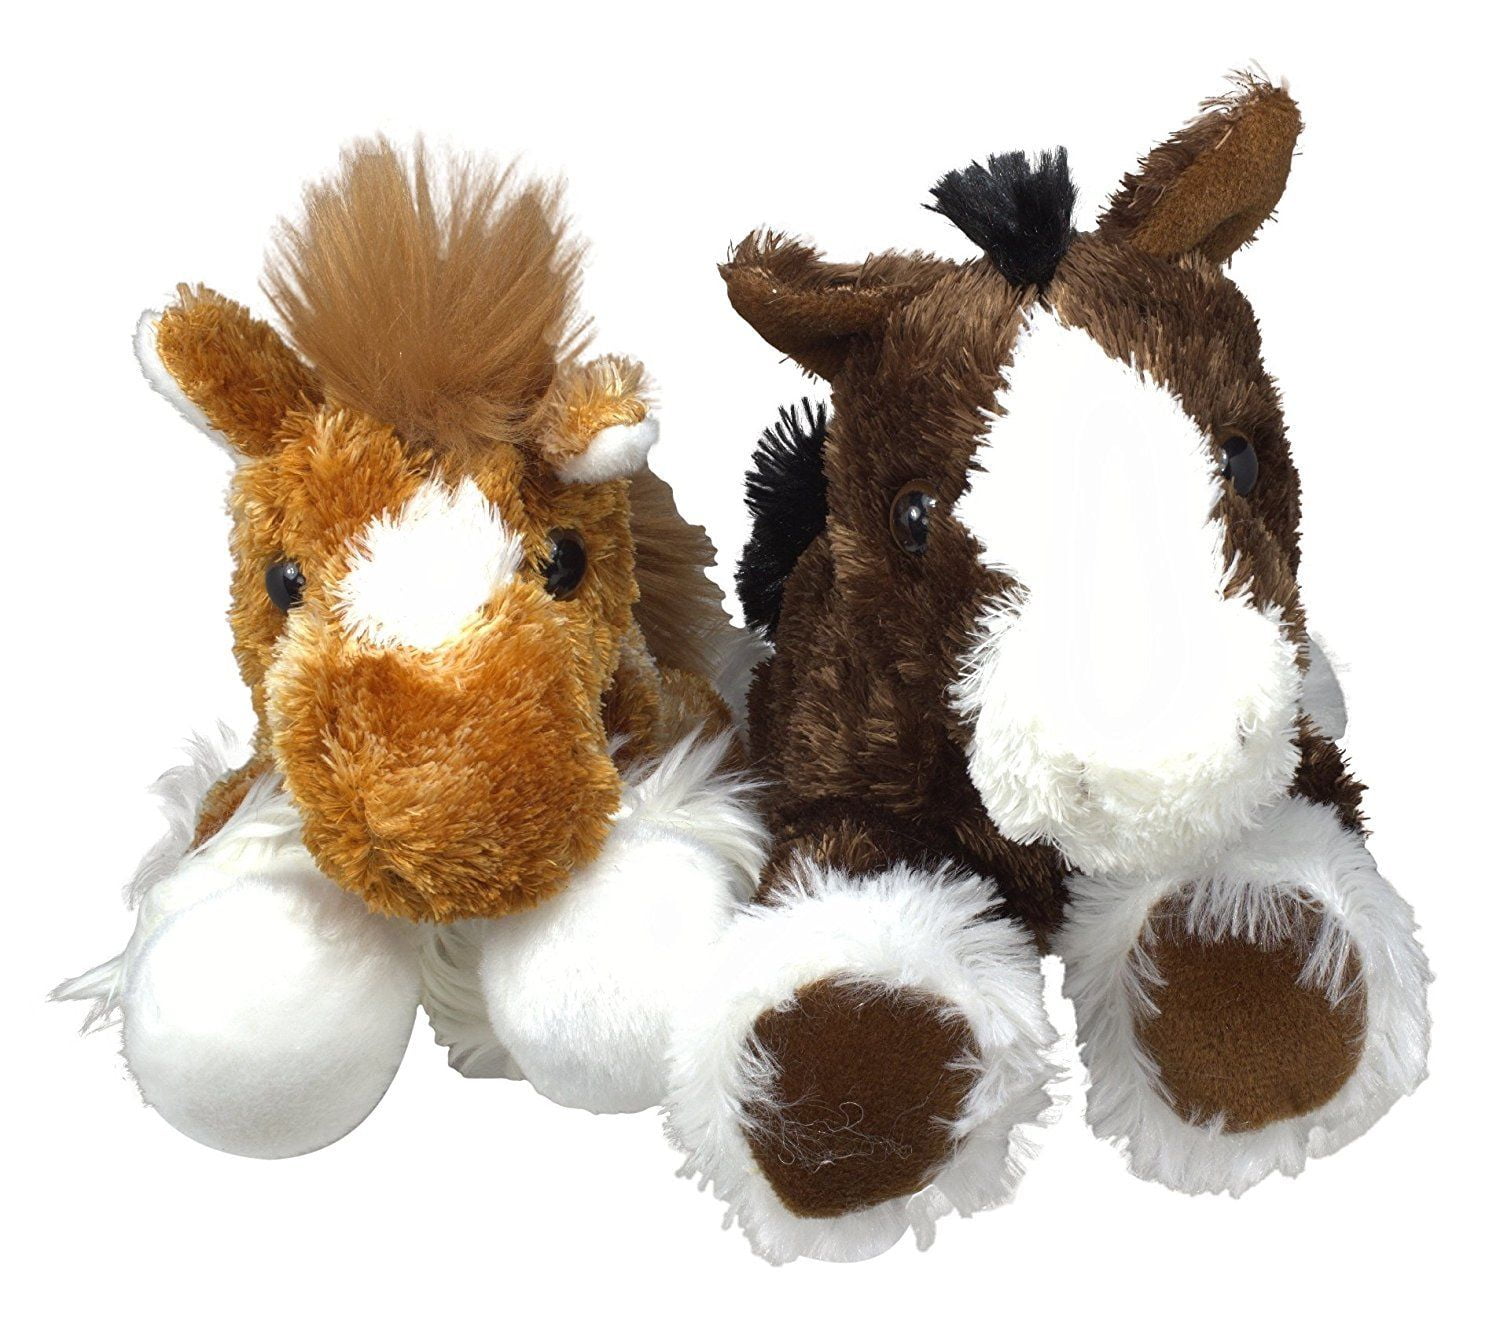 8 Inch Mini Flopsie Clyde Clydesdale Horse Plush Stuffed Animal by Aurora for sale online 